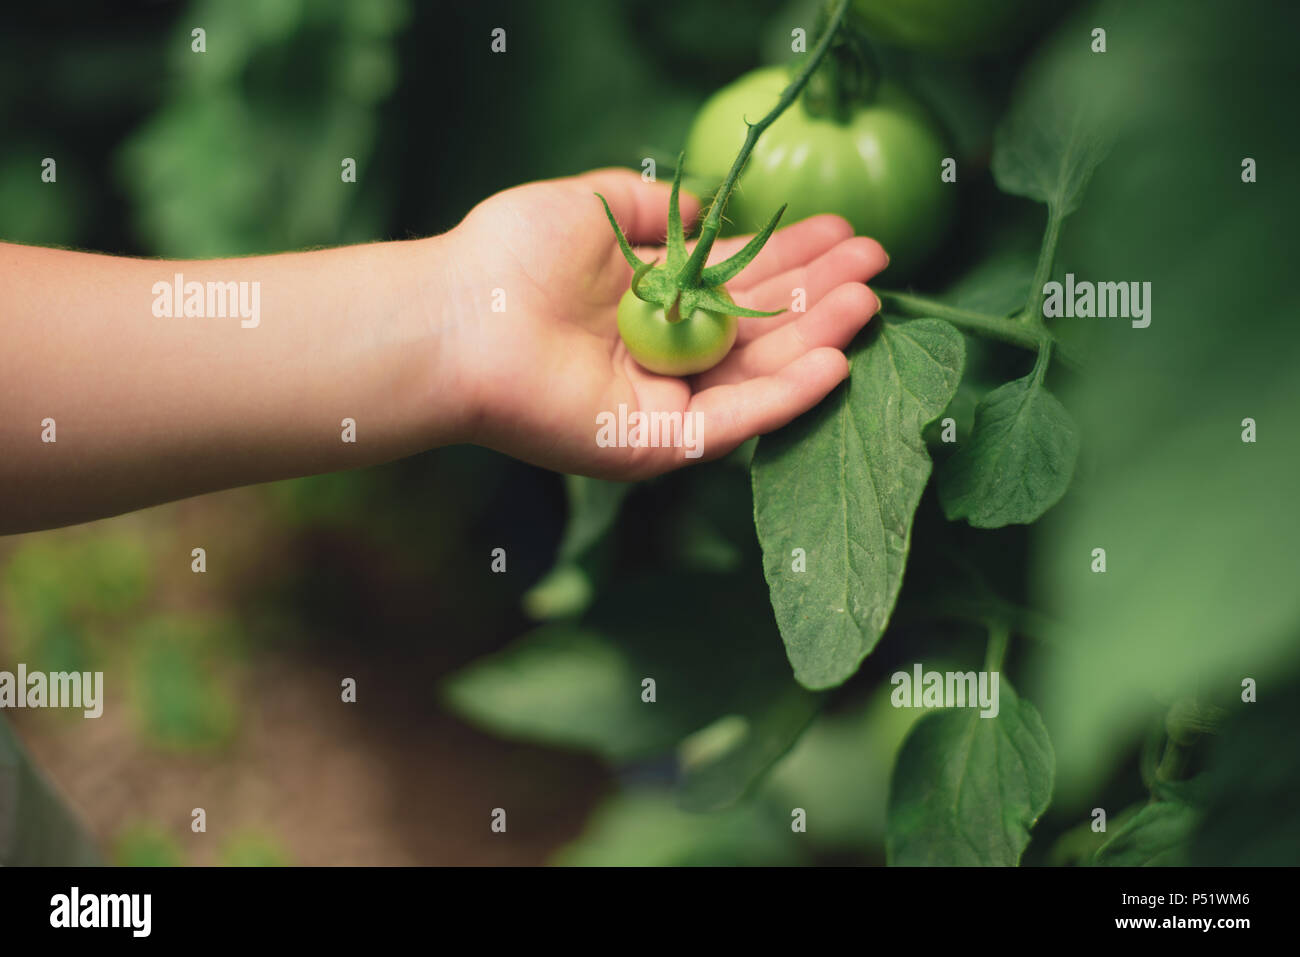 Tomatoes in hands. Little girl hand holding organic green tomato.  Picking tomatoes in green house. Stock Photo